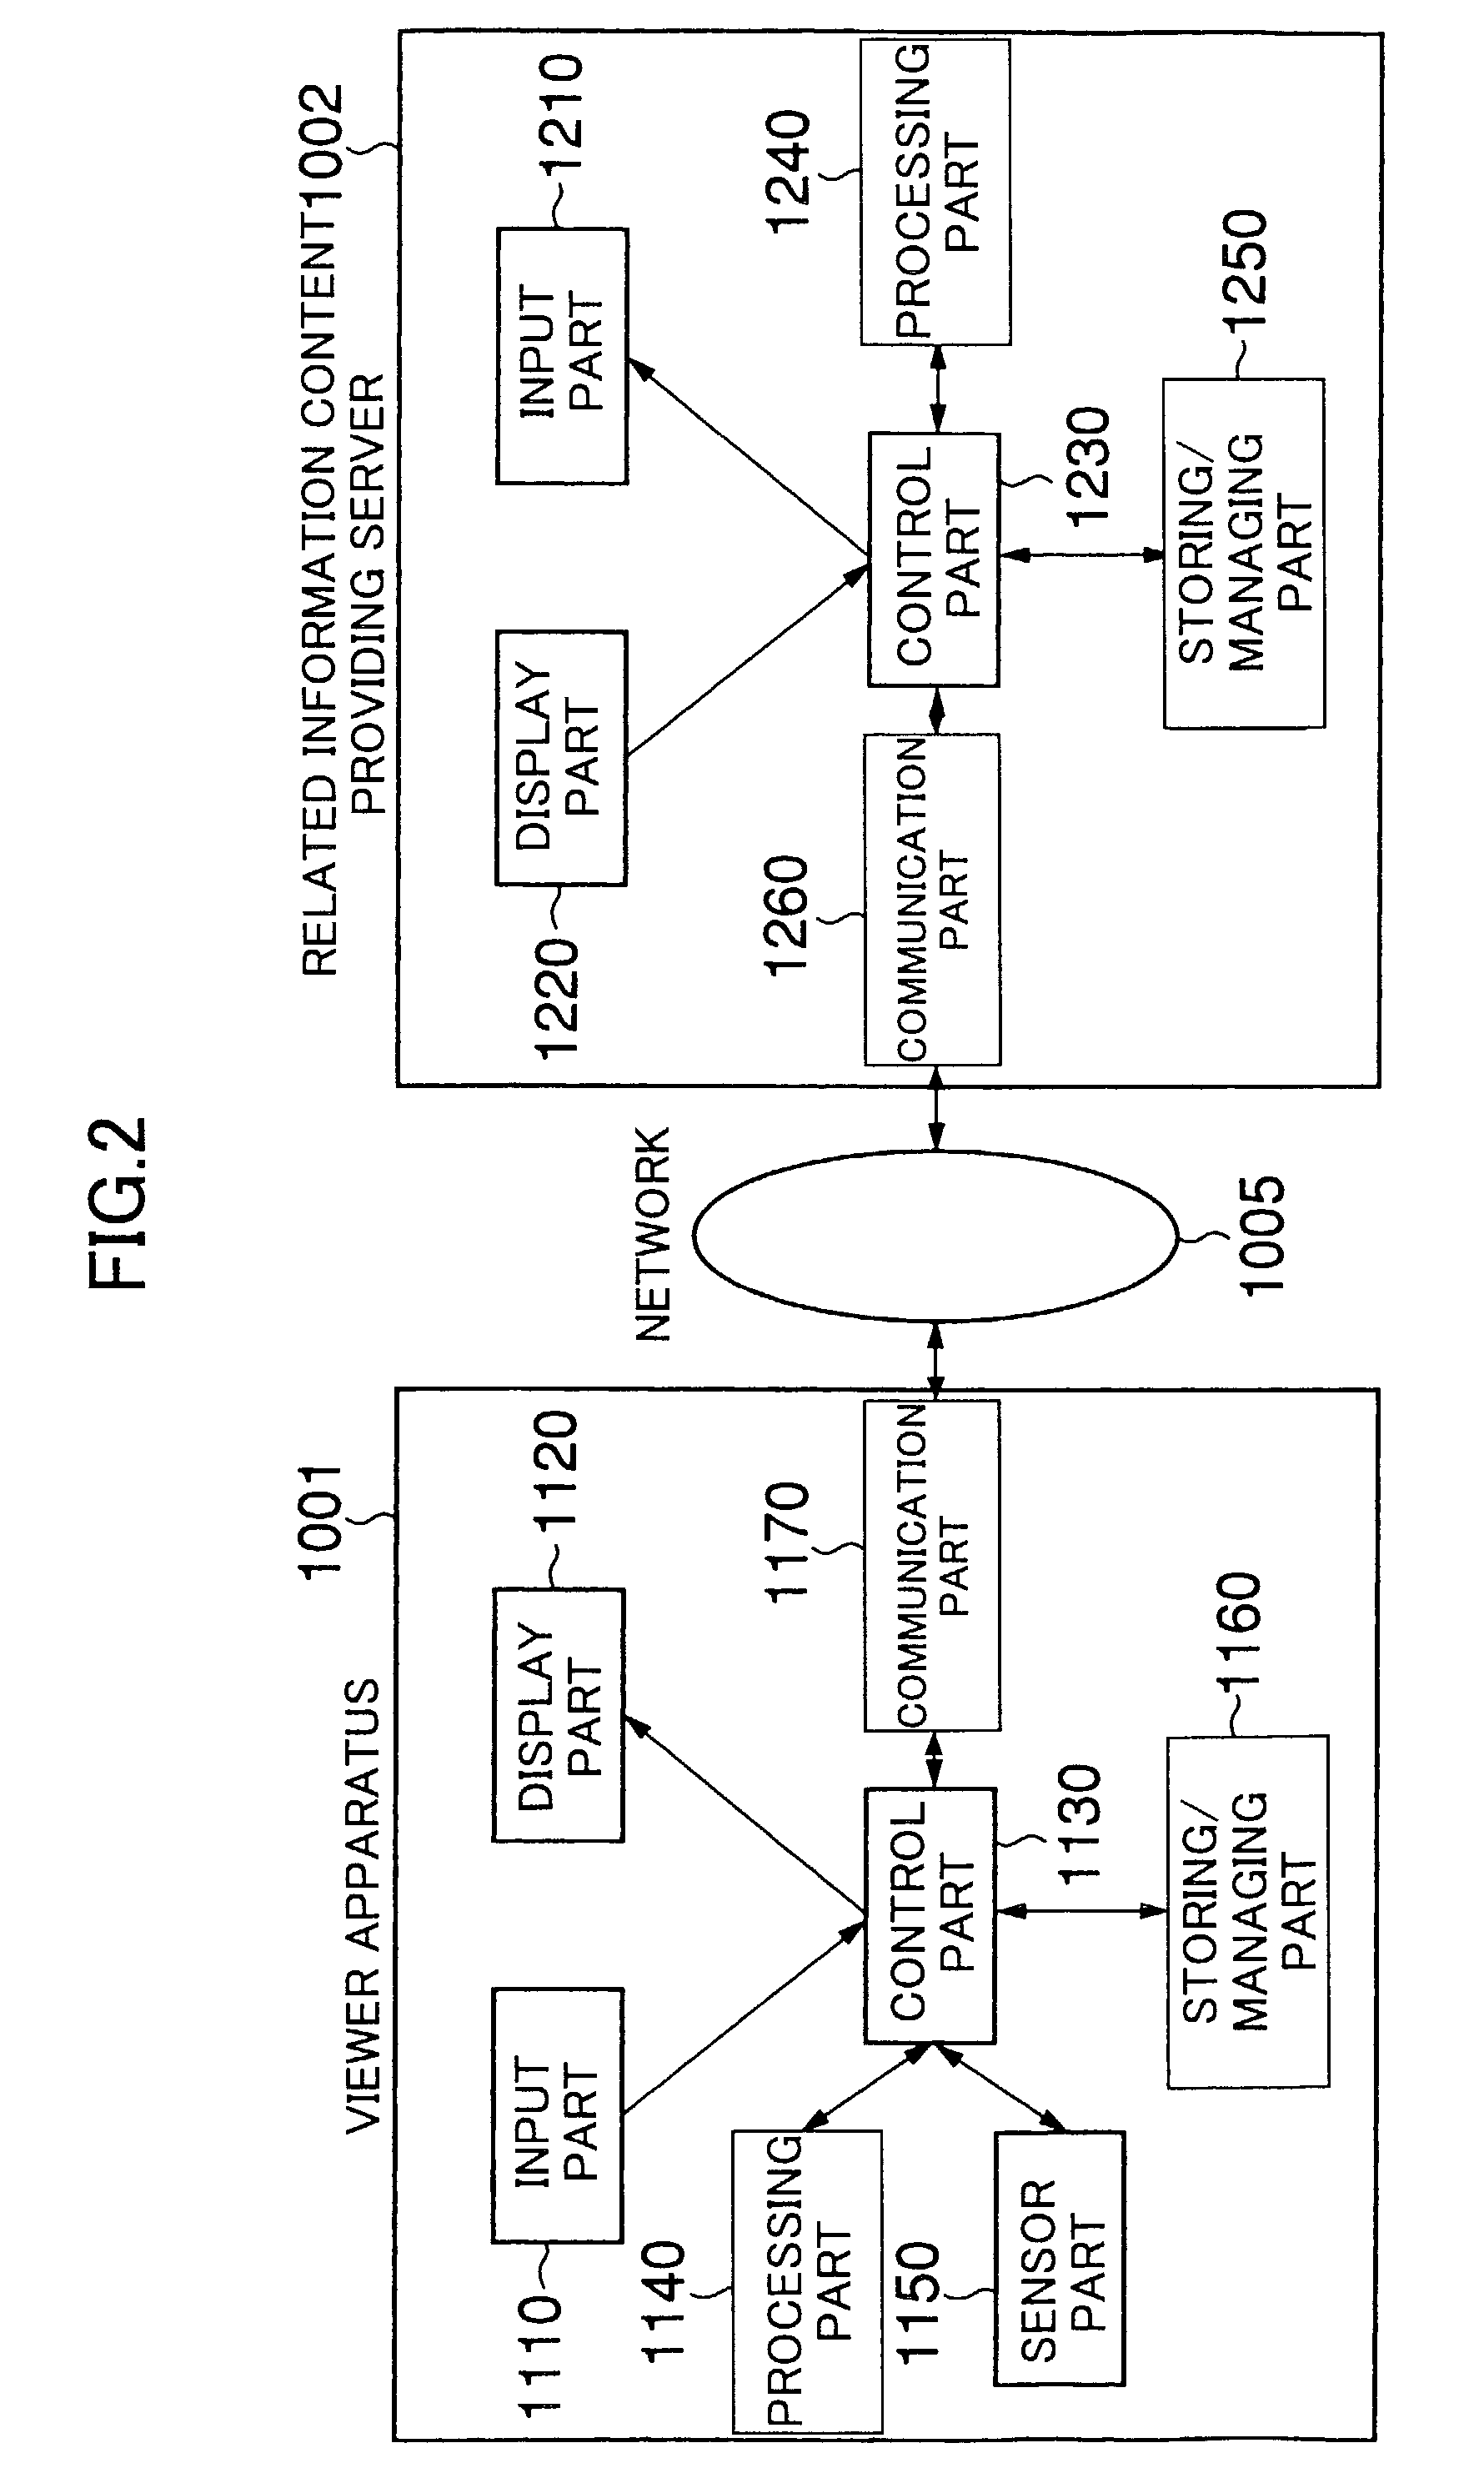 Method, system, and apparatus for acquiring information concerning broadcast information